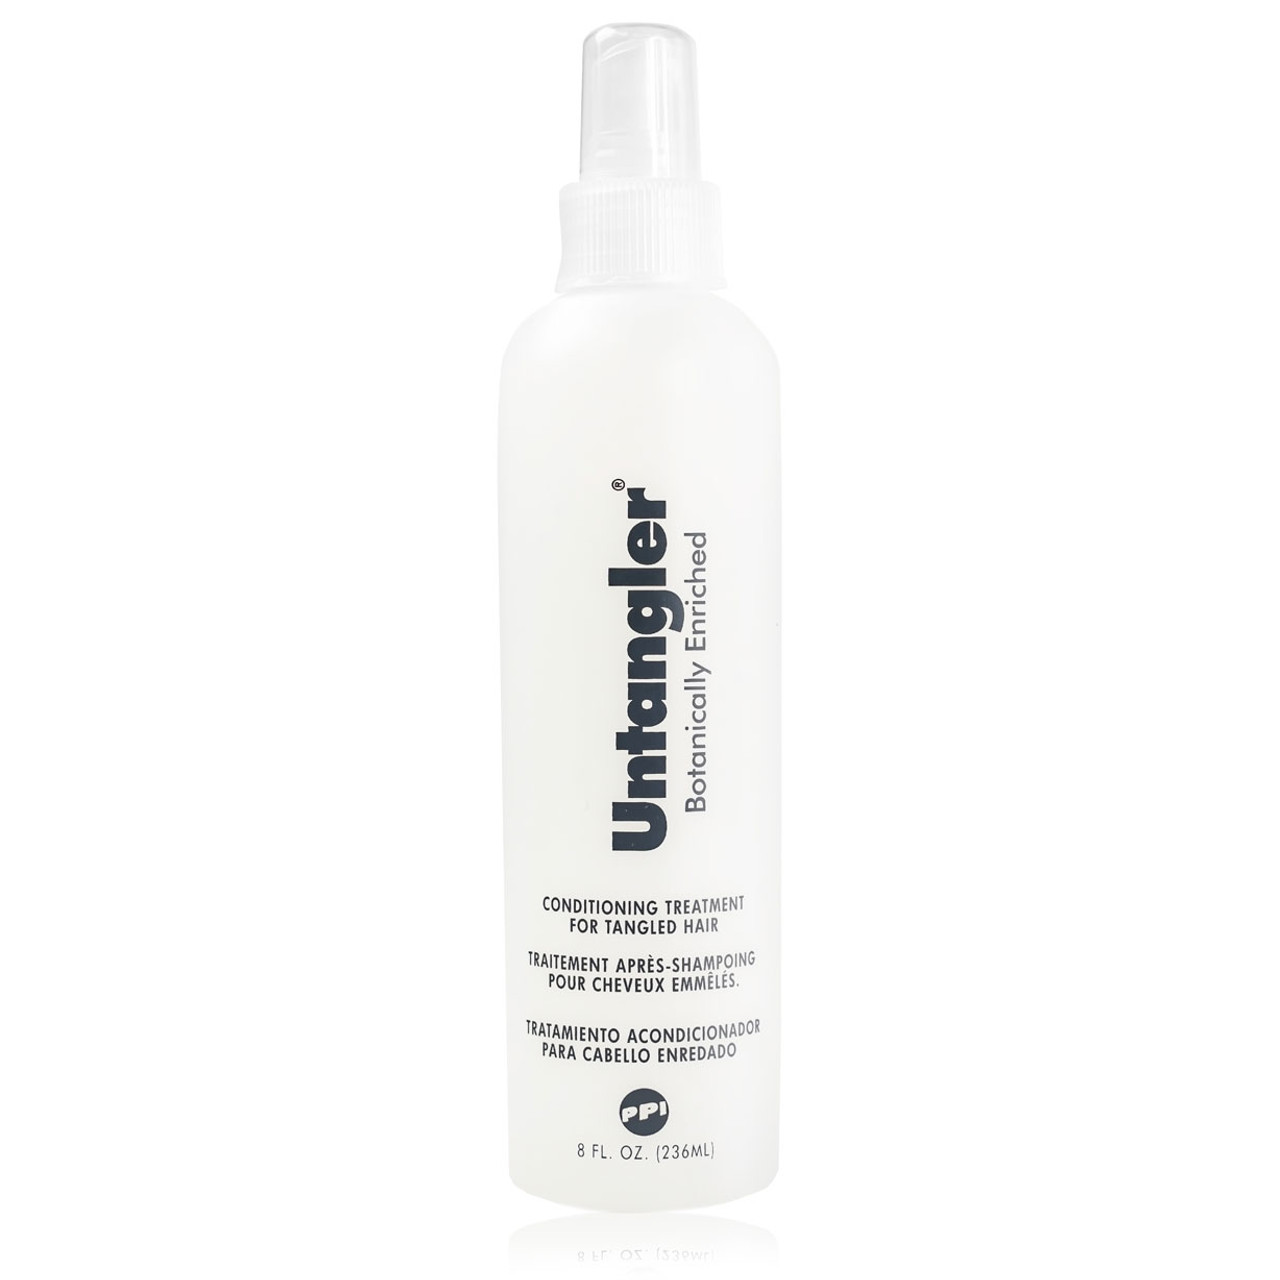 PPI Untangler 8 oz. Hairpiece Styling Product